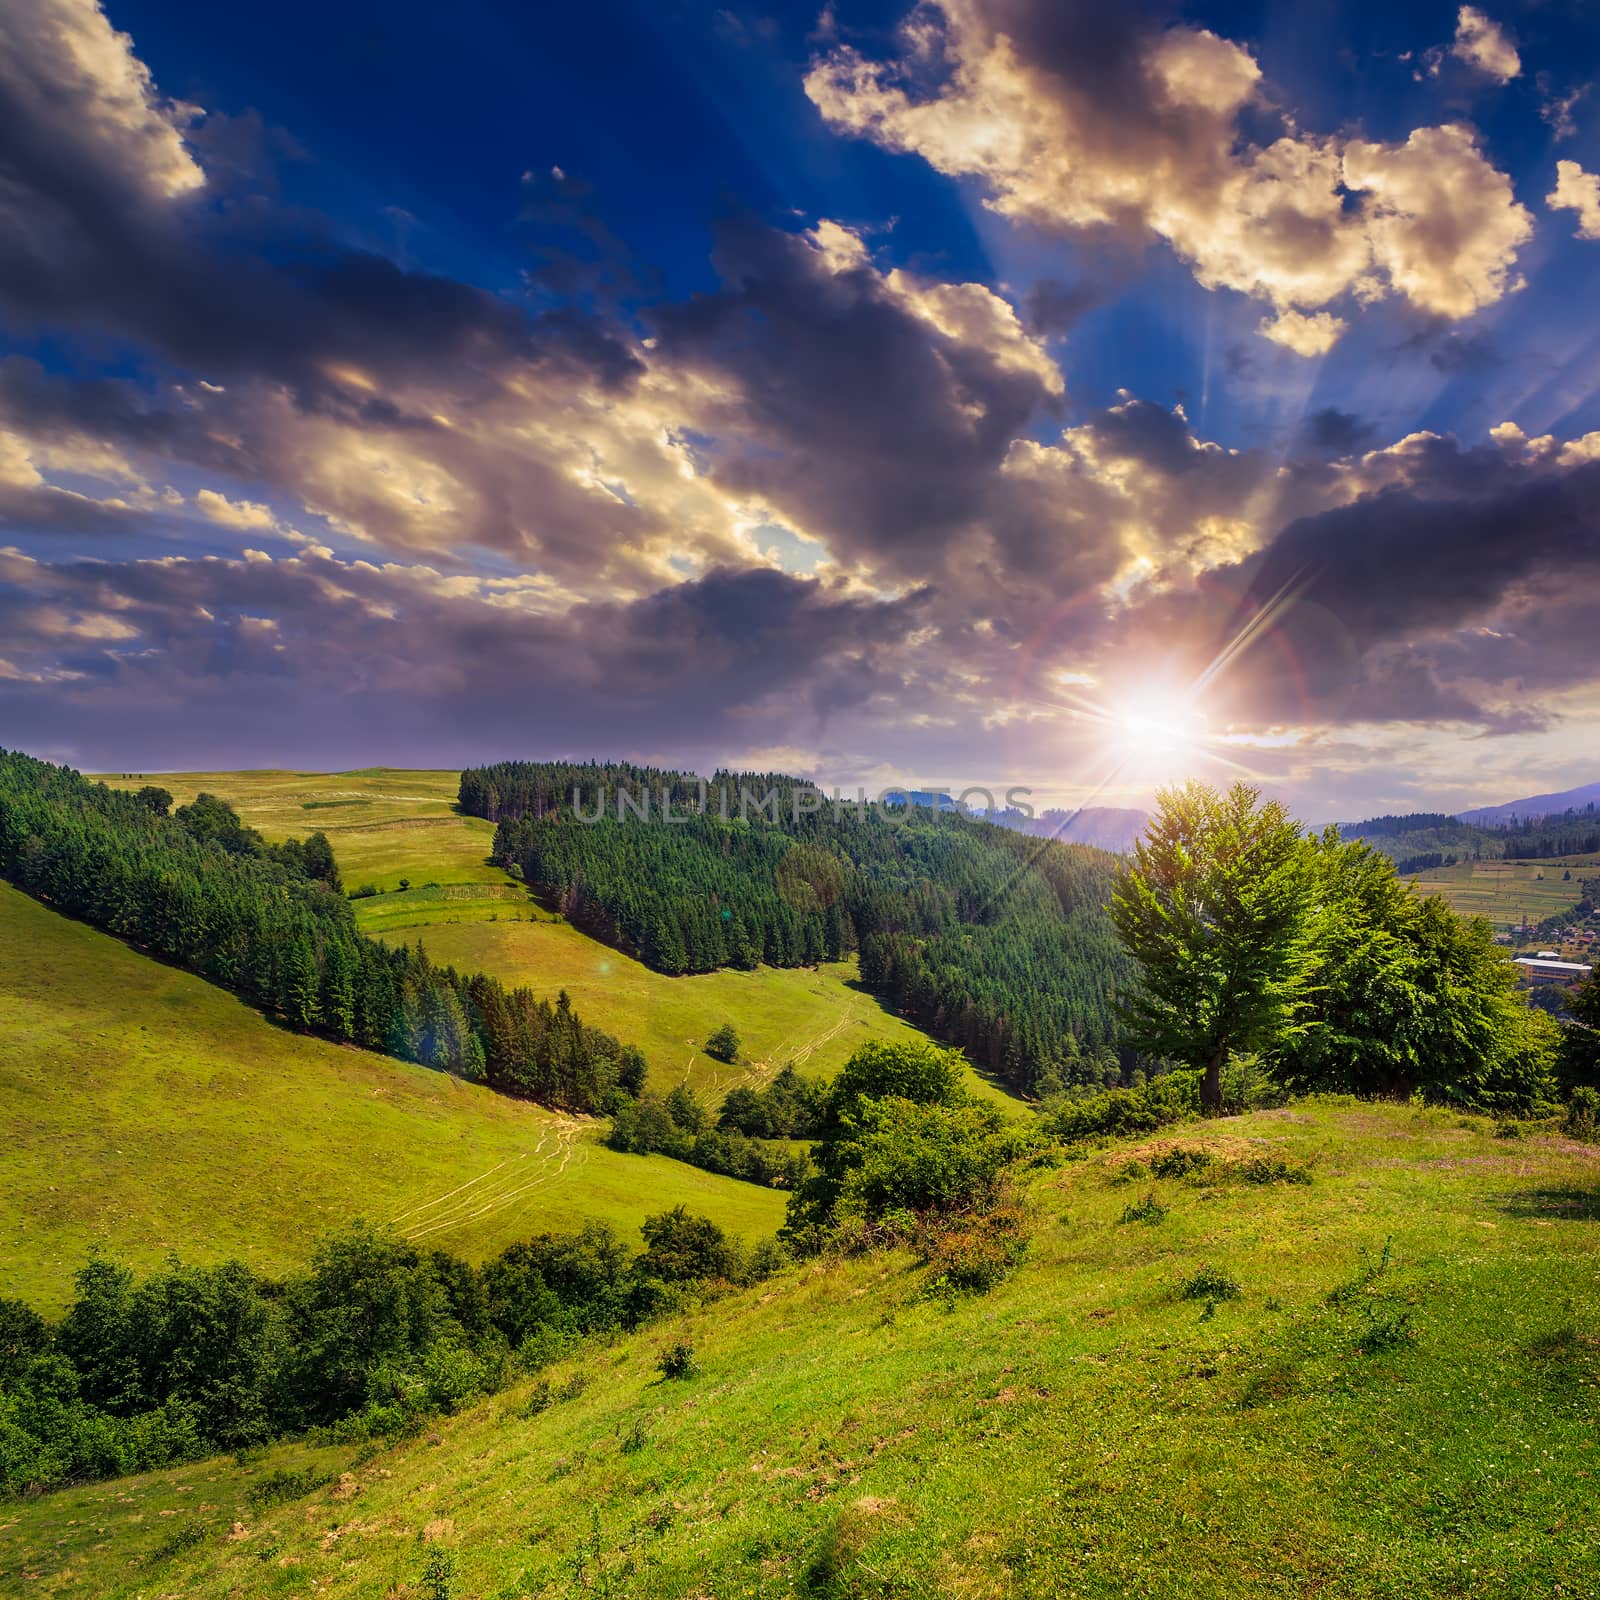 mountain summer landscape. pine trees near meadow and forest on hillside under  sky with clouds at sunset